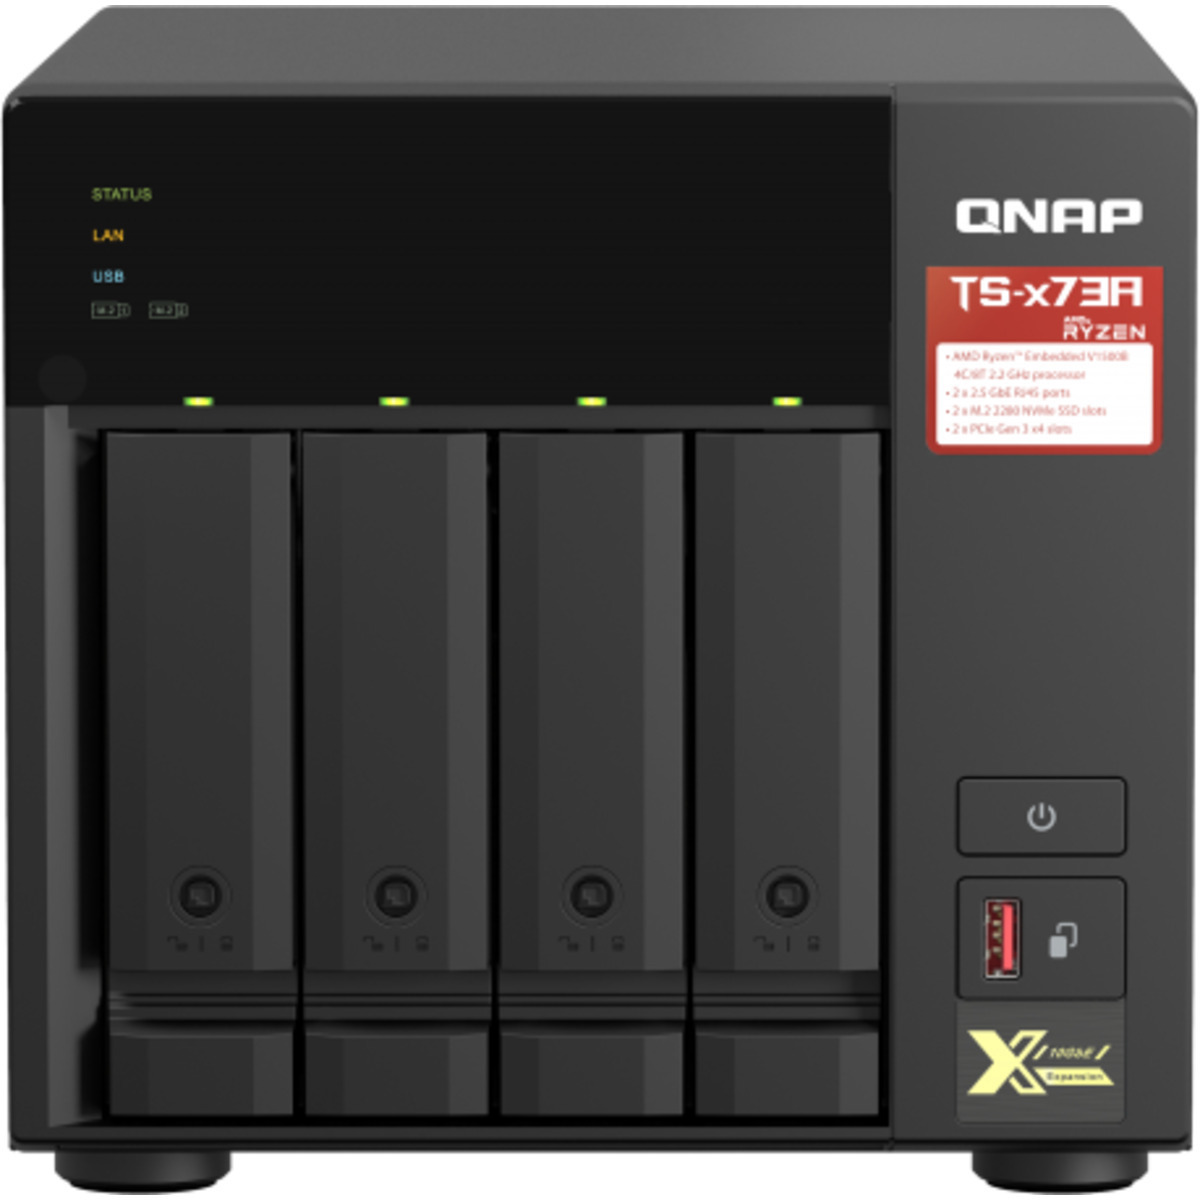 QNAP TS-473A 16tb 4-Bay Desktop Multimedia / Power User / Business NAS - Network Attached Storage Device 4x4tb Seagate BarraCuda ST4000DM004 3.5 7200rpm SATA 6Gb/s HDD CONSUMER Class Drives Installed - Burn-In Tested TS-473A